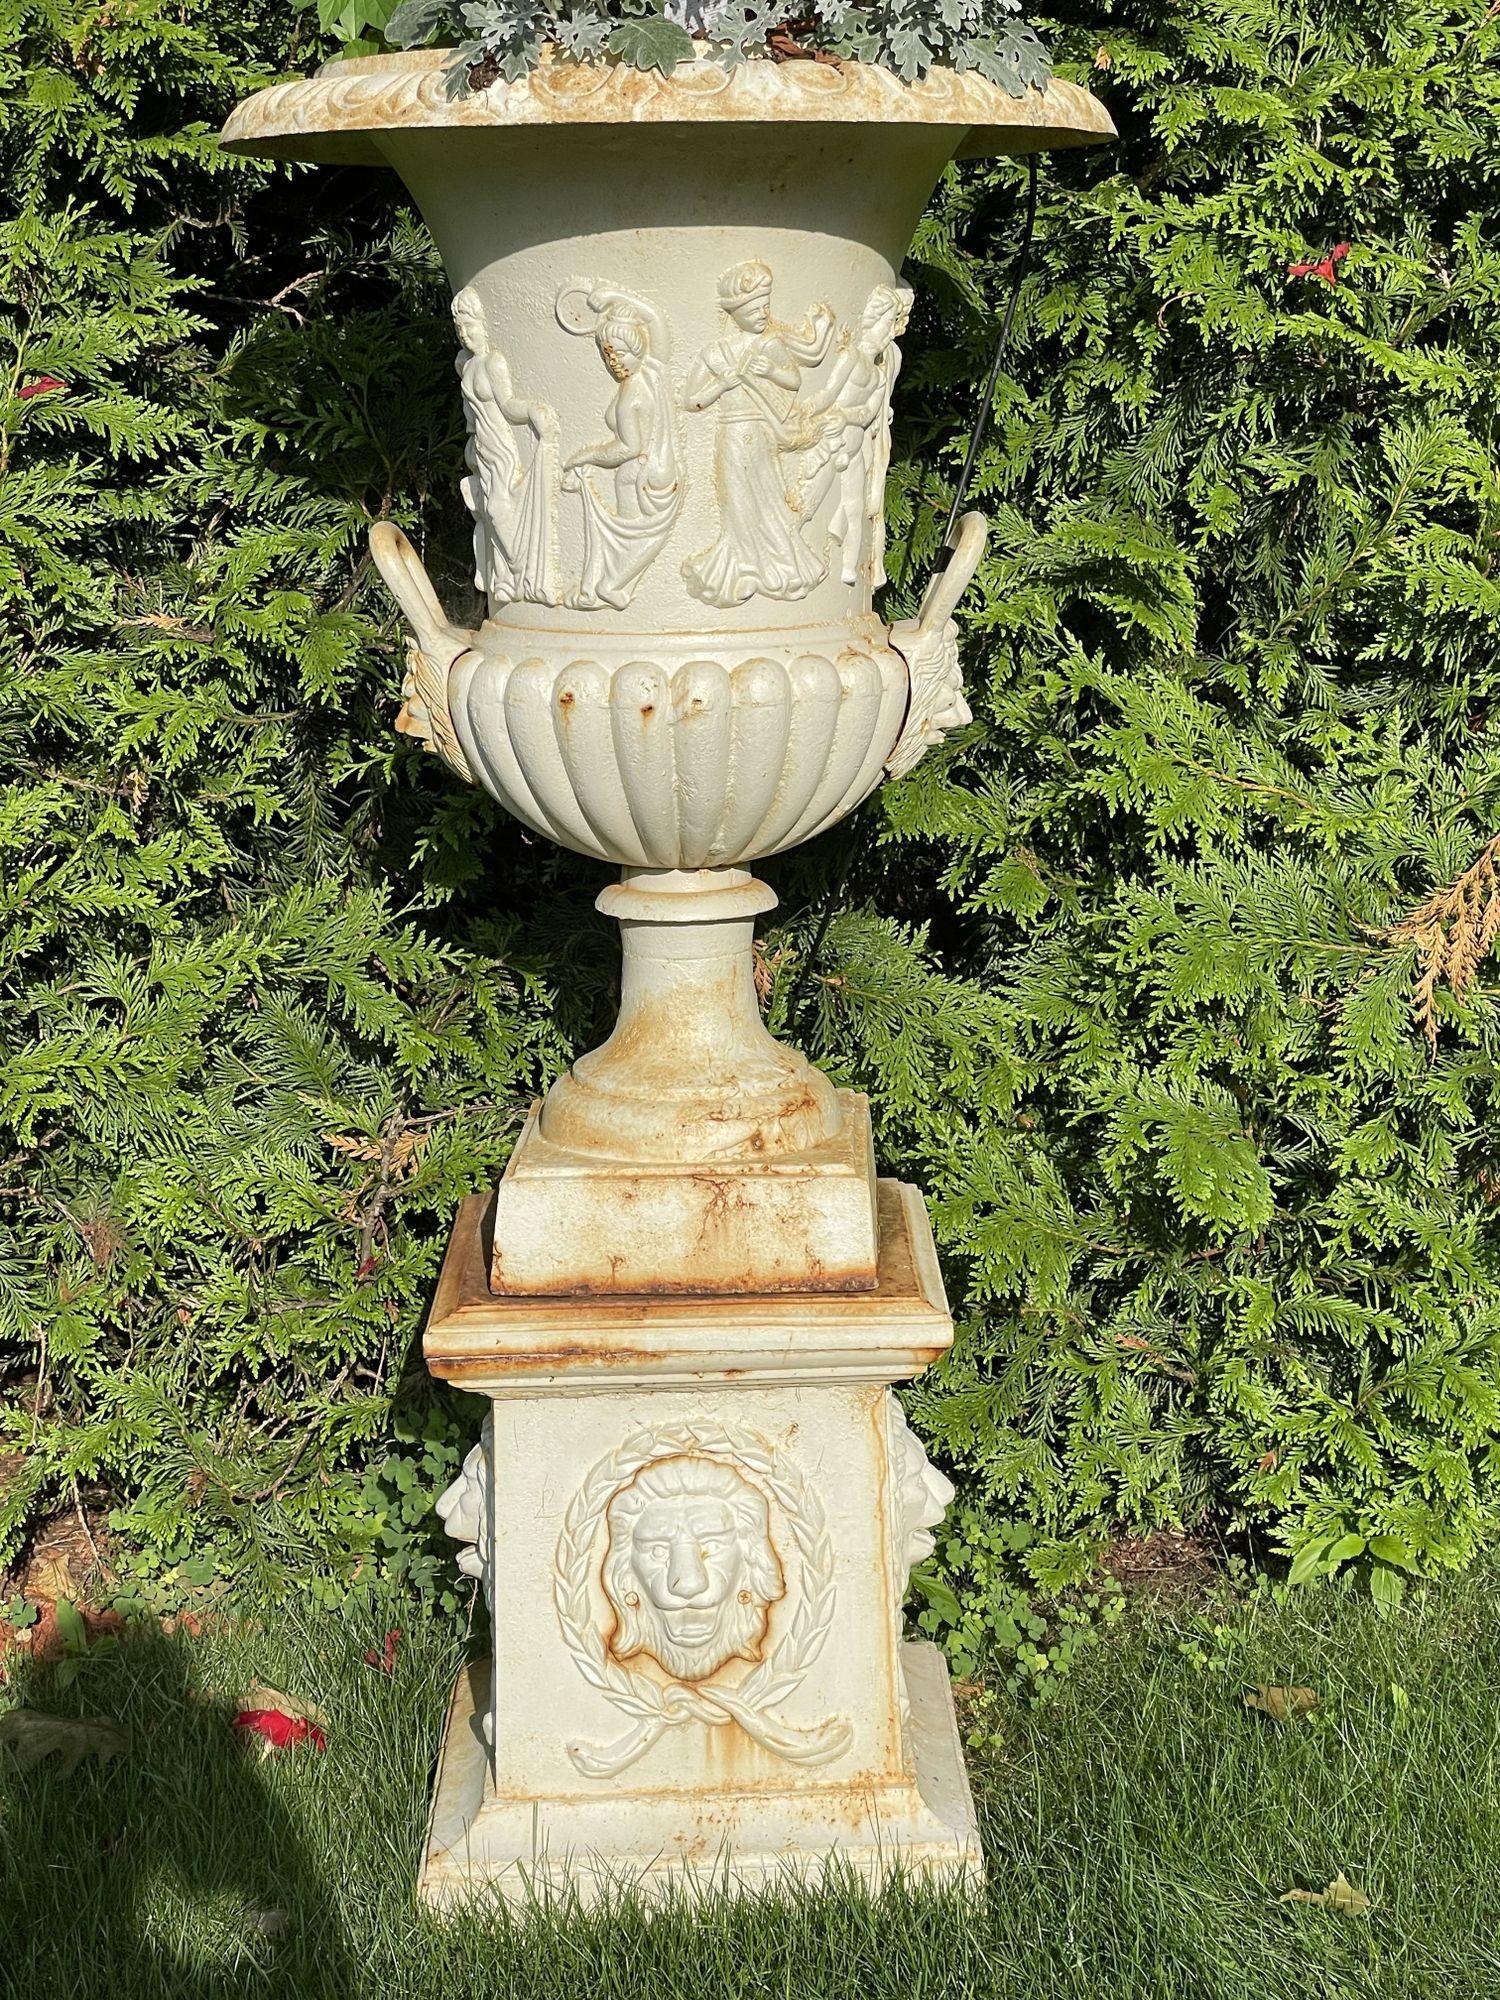 Pair of Cast Iron Urn or Planters or Jardinières
 
A stunning pair of Neoclassical Urn or Planters on Pedestal Bases. Direct from a New Canaan CT Mansion of an Lady come this stunning pair of Garden Urns. Each massive urn sits upon a pedestal base